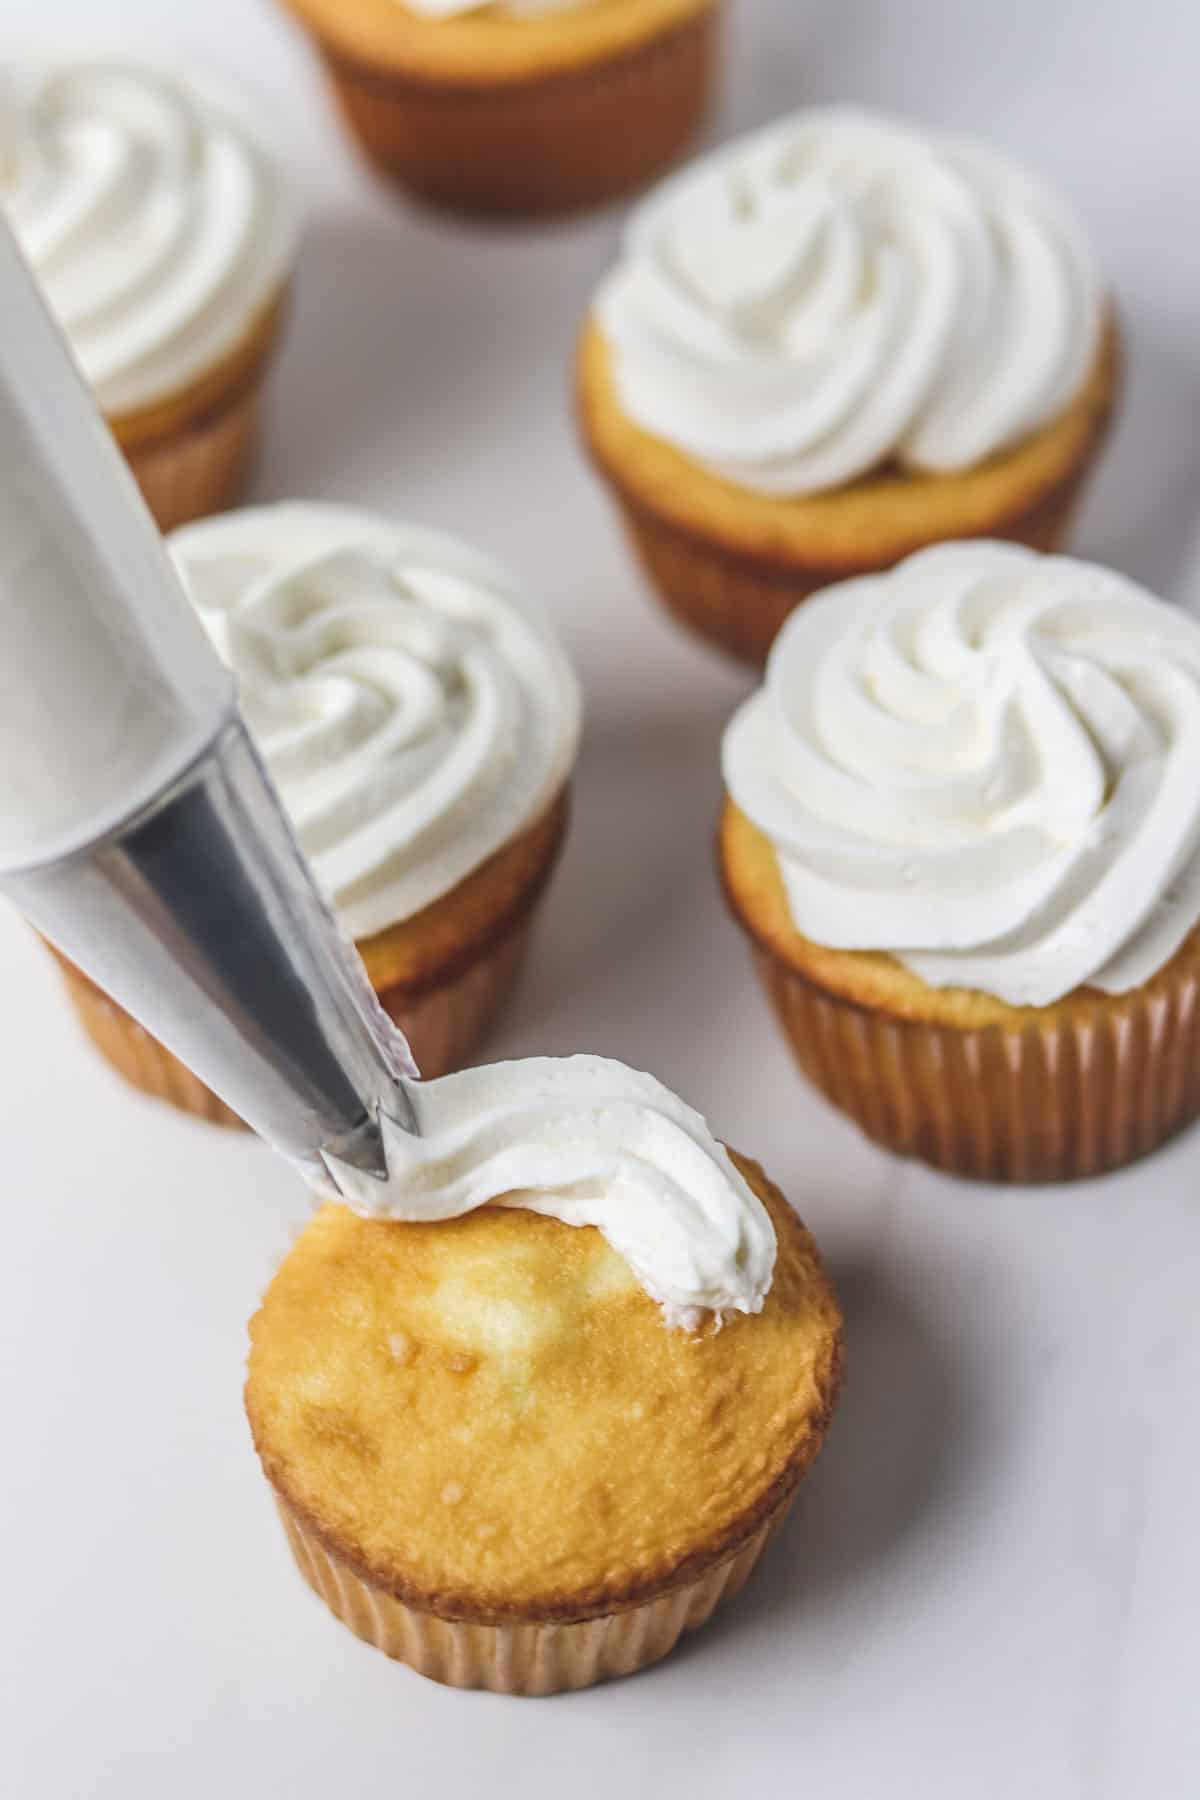 piping white frosting on a vanilla cupcake